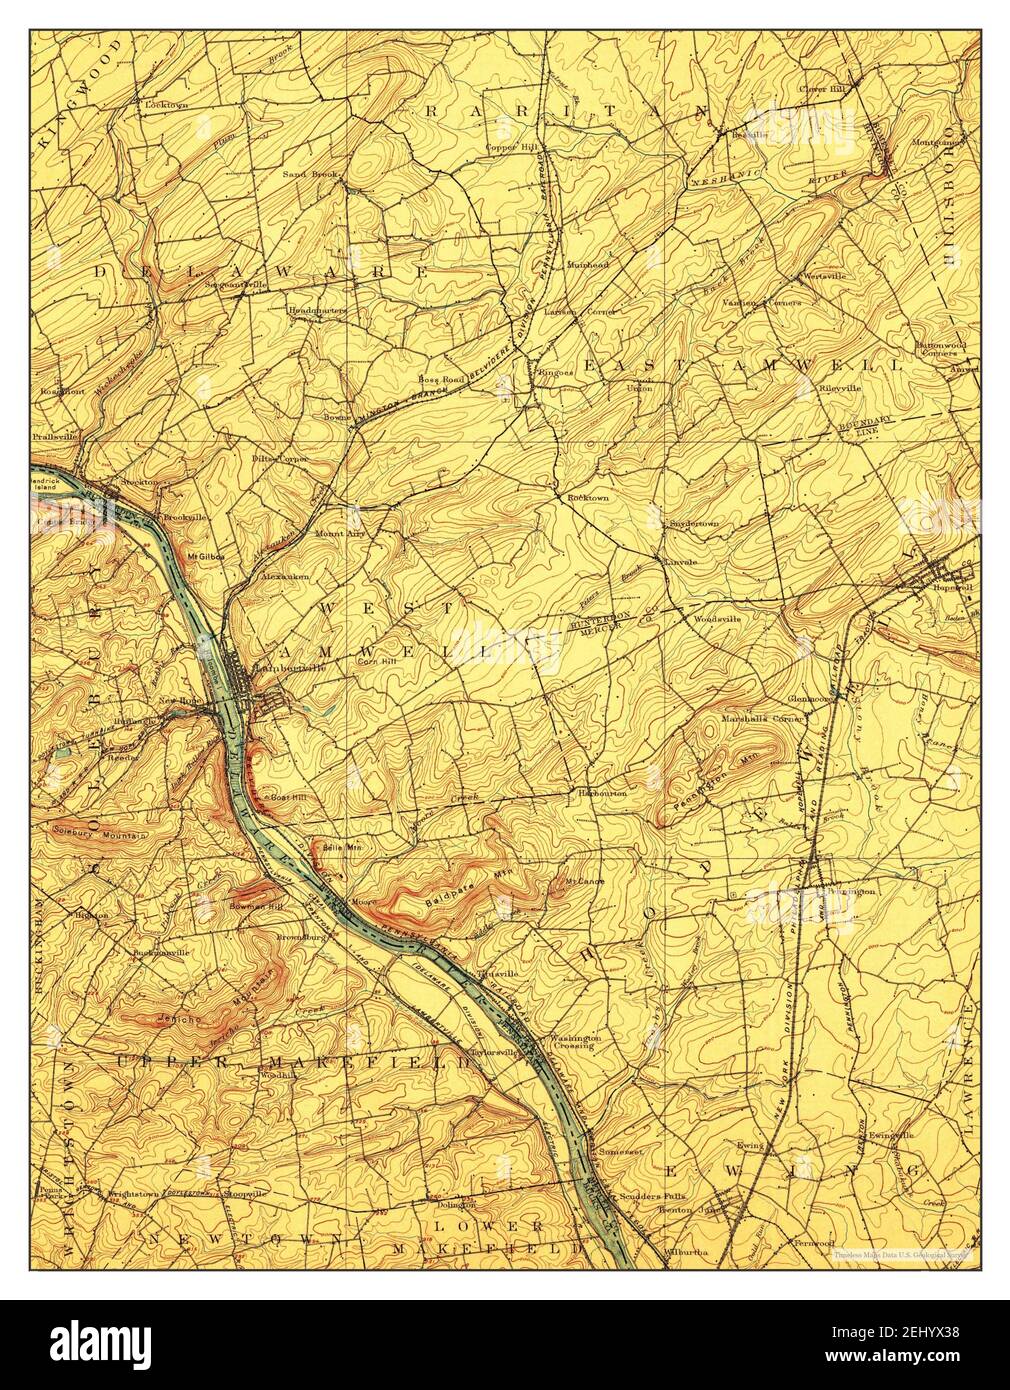 Lambertville, New Jersey, map 1906, 1:62500, United States of America by Timeless Maps, data U.S. Geological Survey Stock Photo